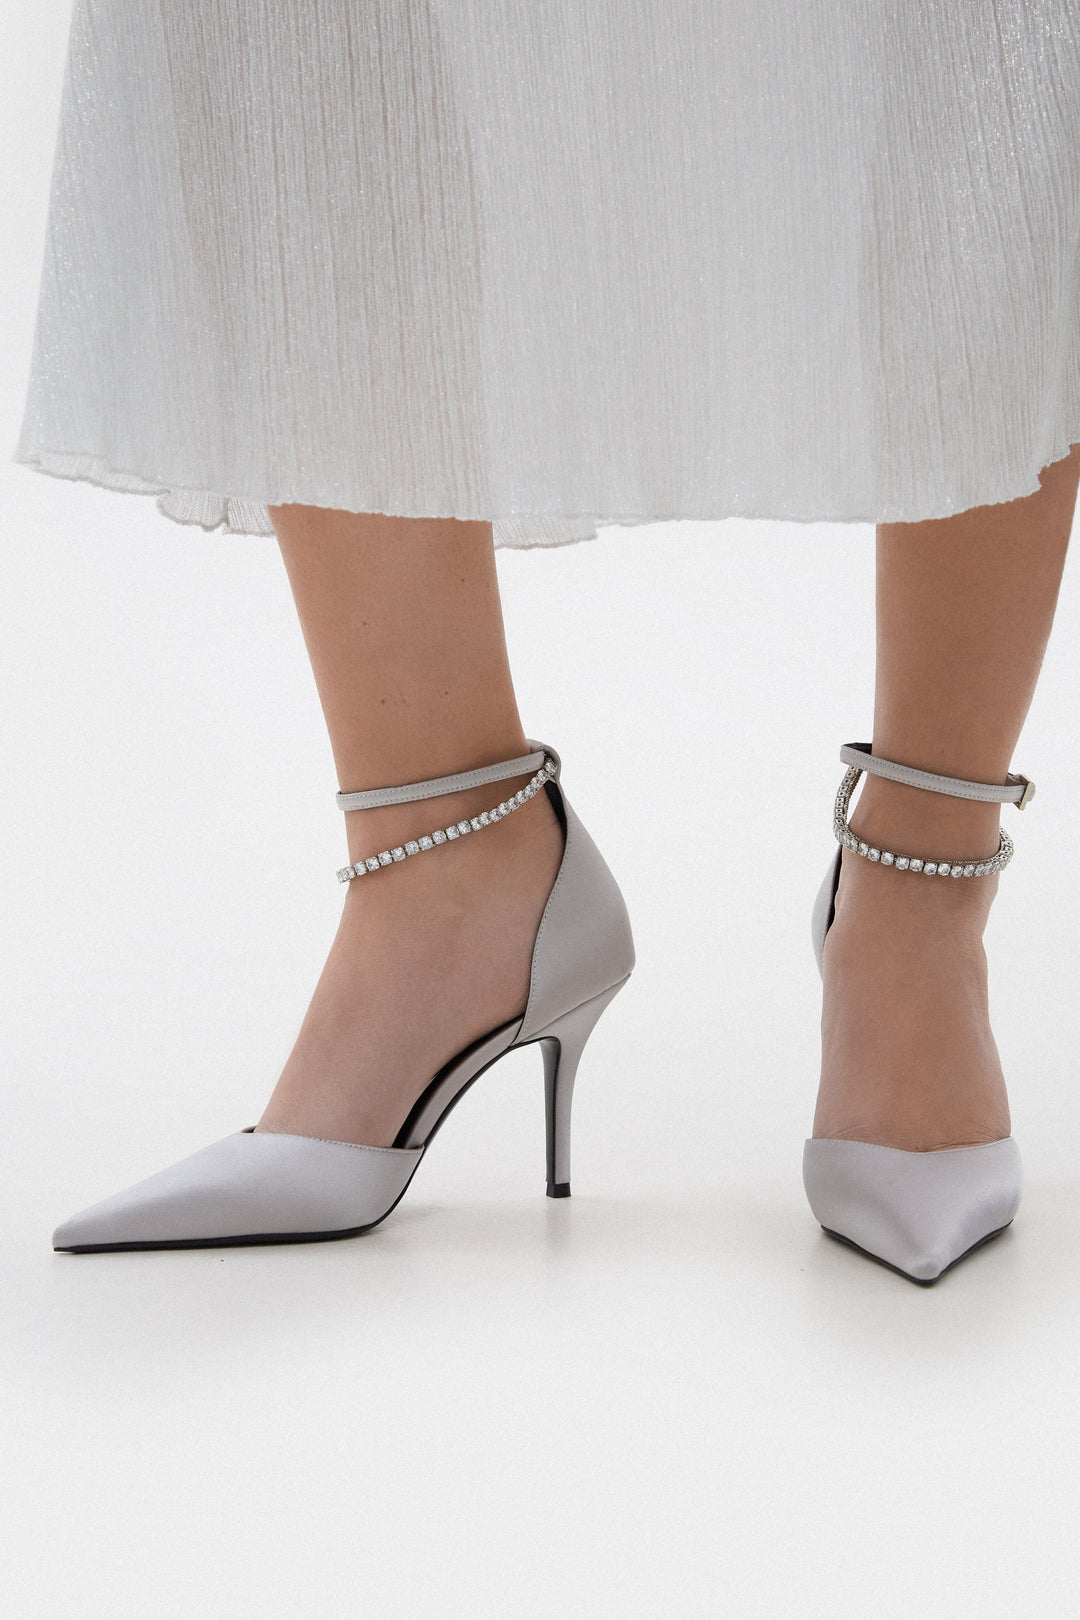 Women's Grey Pointed Toe Pumps with Crystals Estro x MustHave ER00114244.